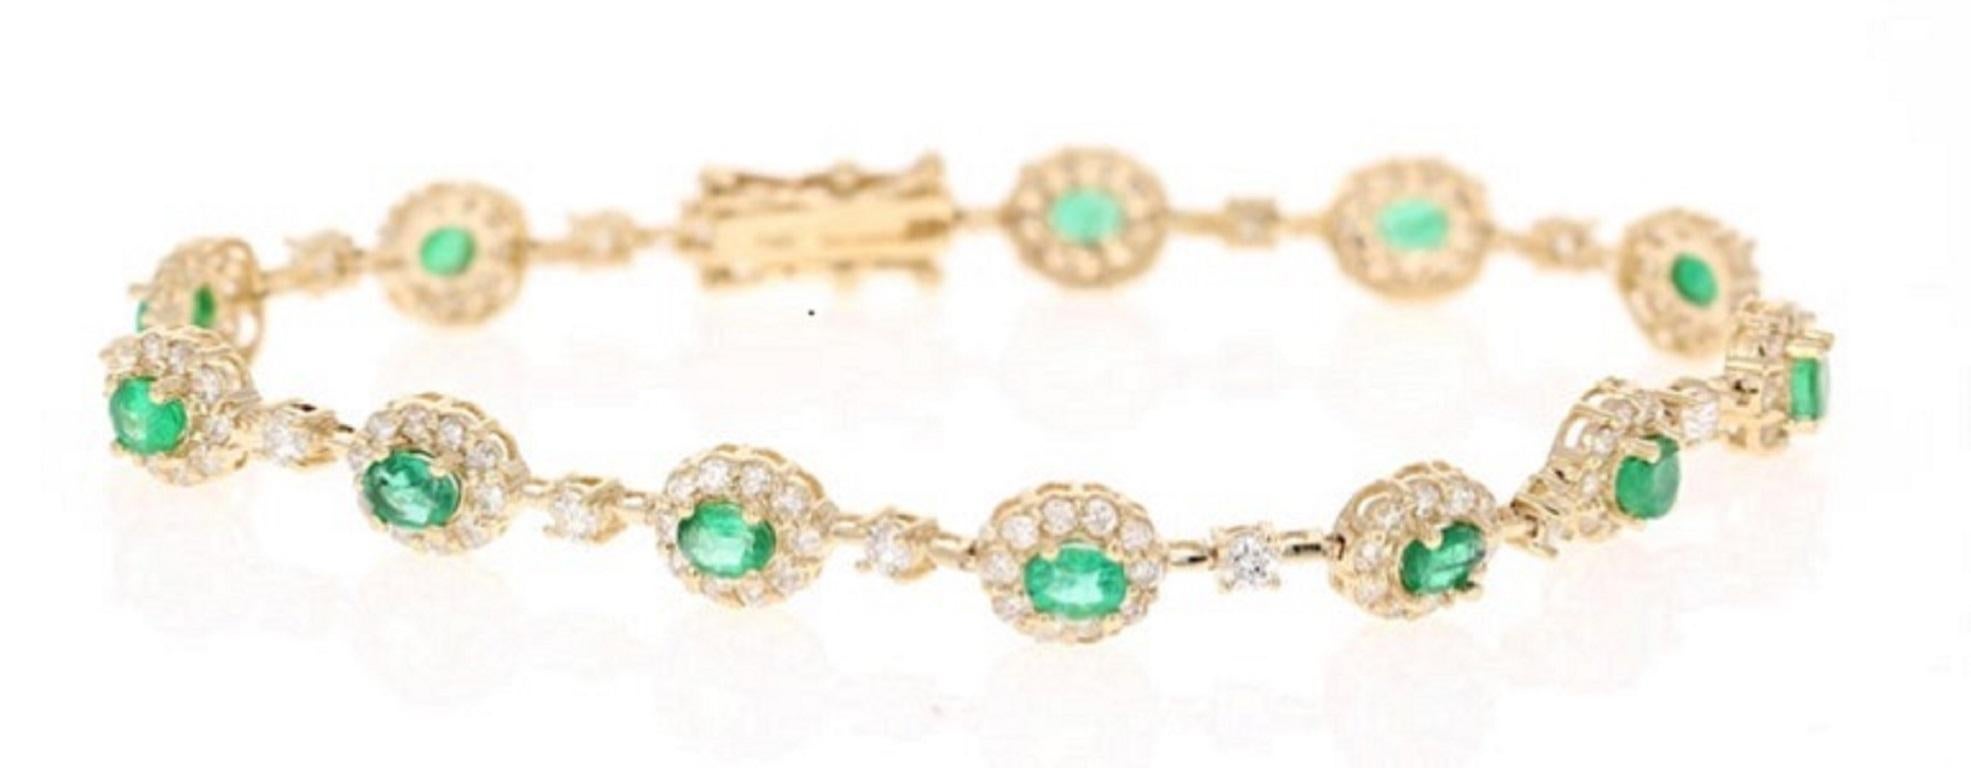 Dainty, Delicate, and Classically Beautful. 
A 14K Yellow Gold Emerald and Diamond Bracelet. 

The 12 Oval Cut Emeralds that weigh 2.23 carats and the 135 Round Cut Diamonds that weigh 2.28 carats.  The Clarity and Color of the Diamonds is SI2/F. 